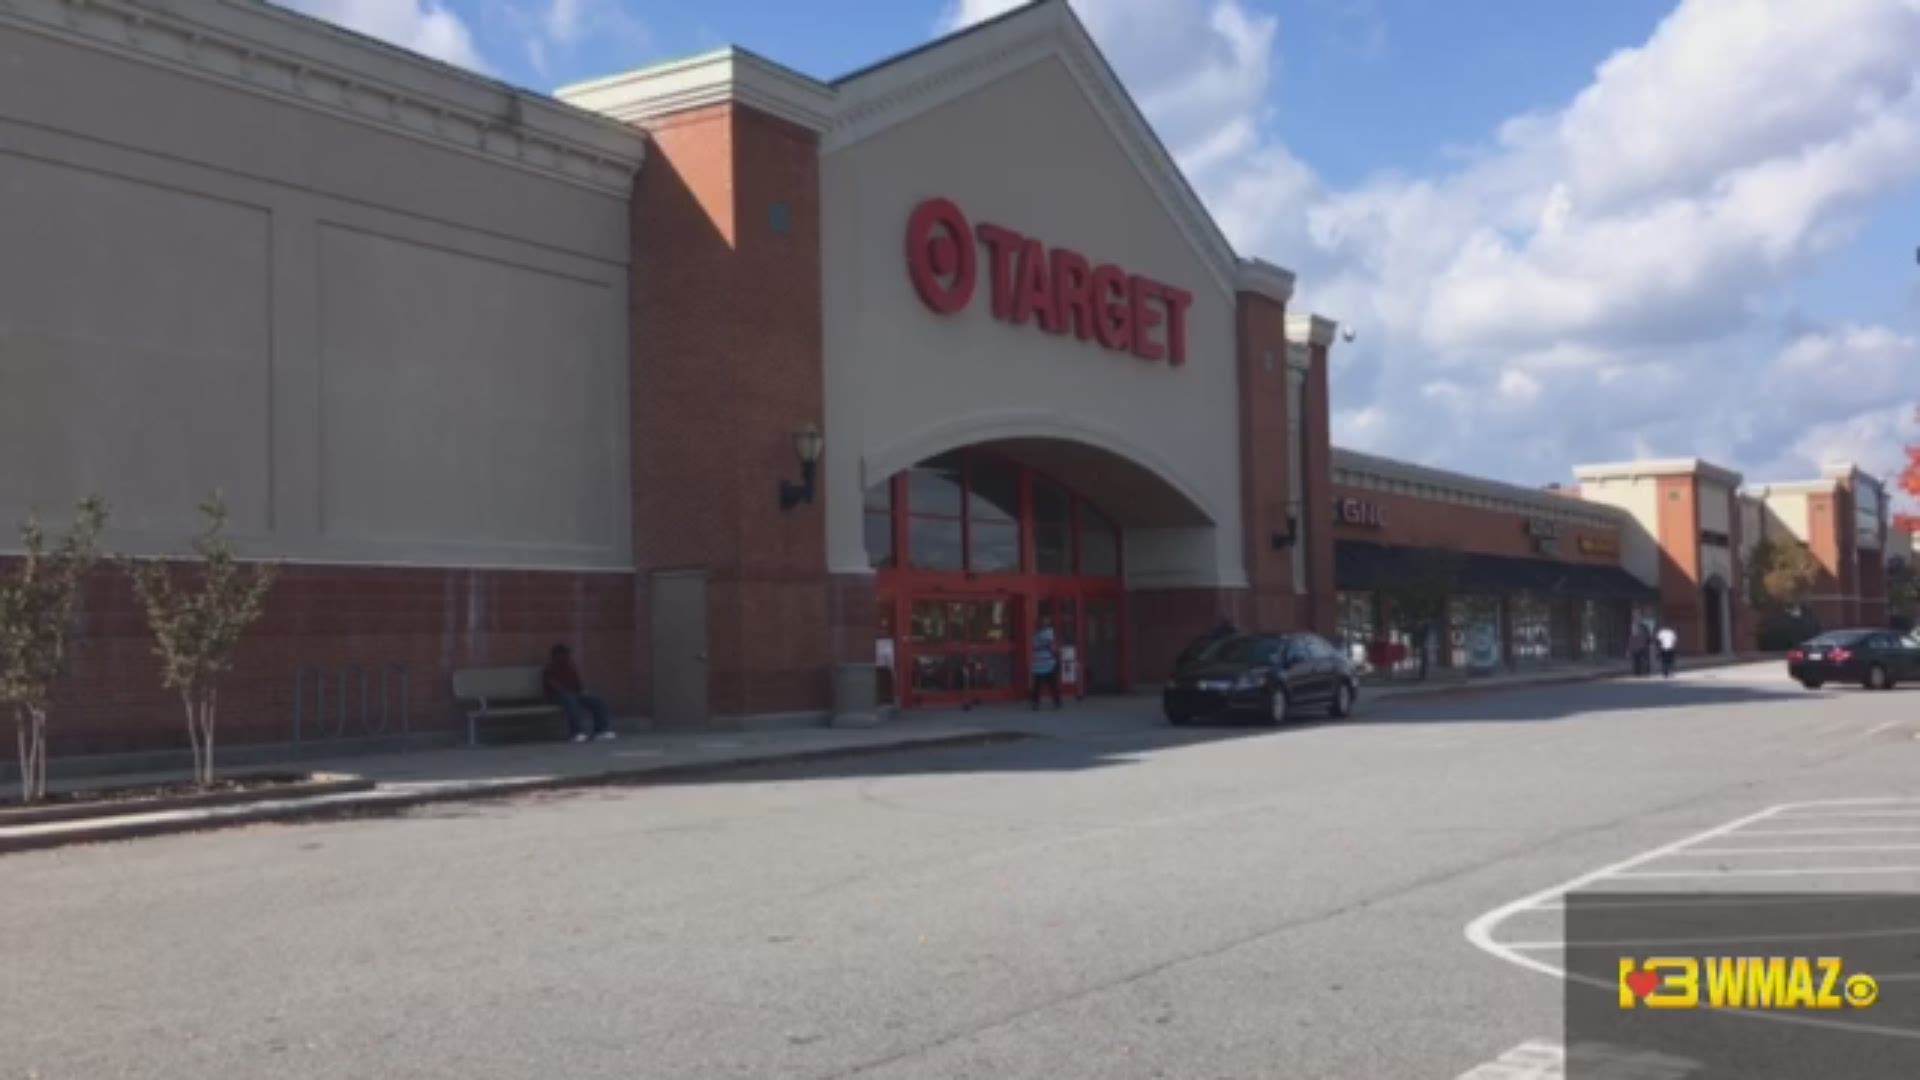 The Target store in Macon's Eisenhower Crossing Shopping Center will be closing in February 2018.